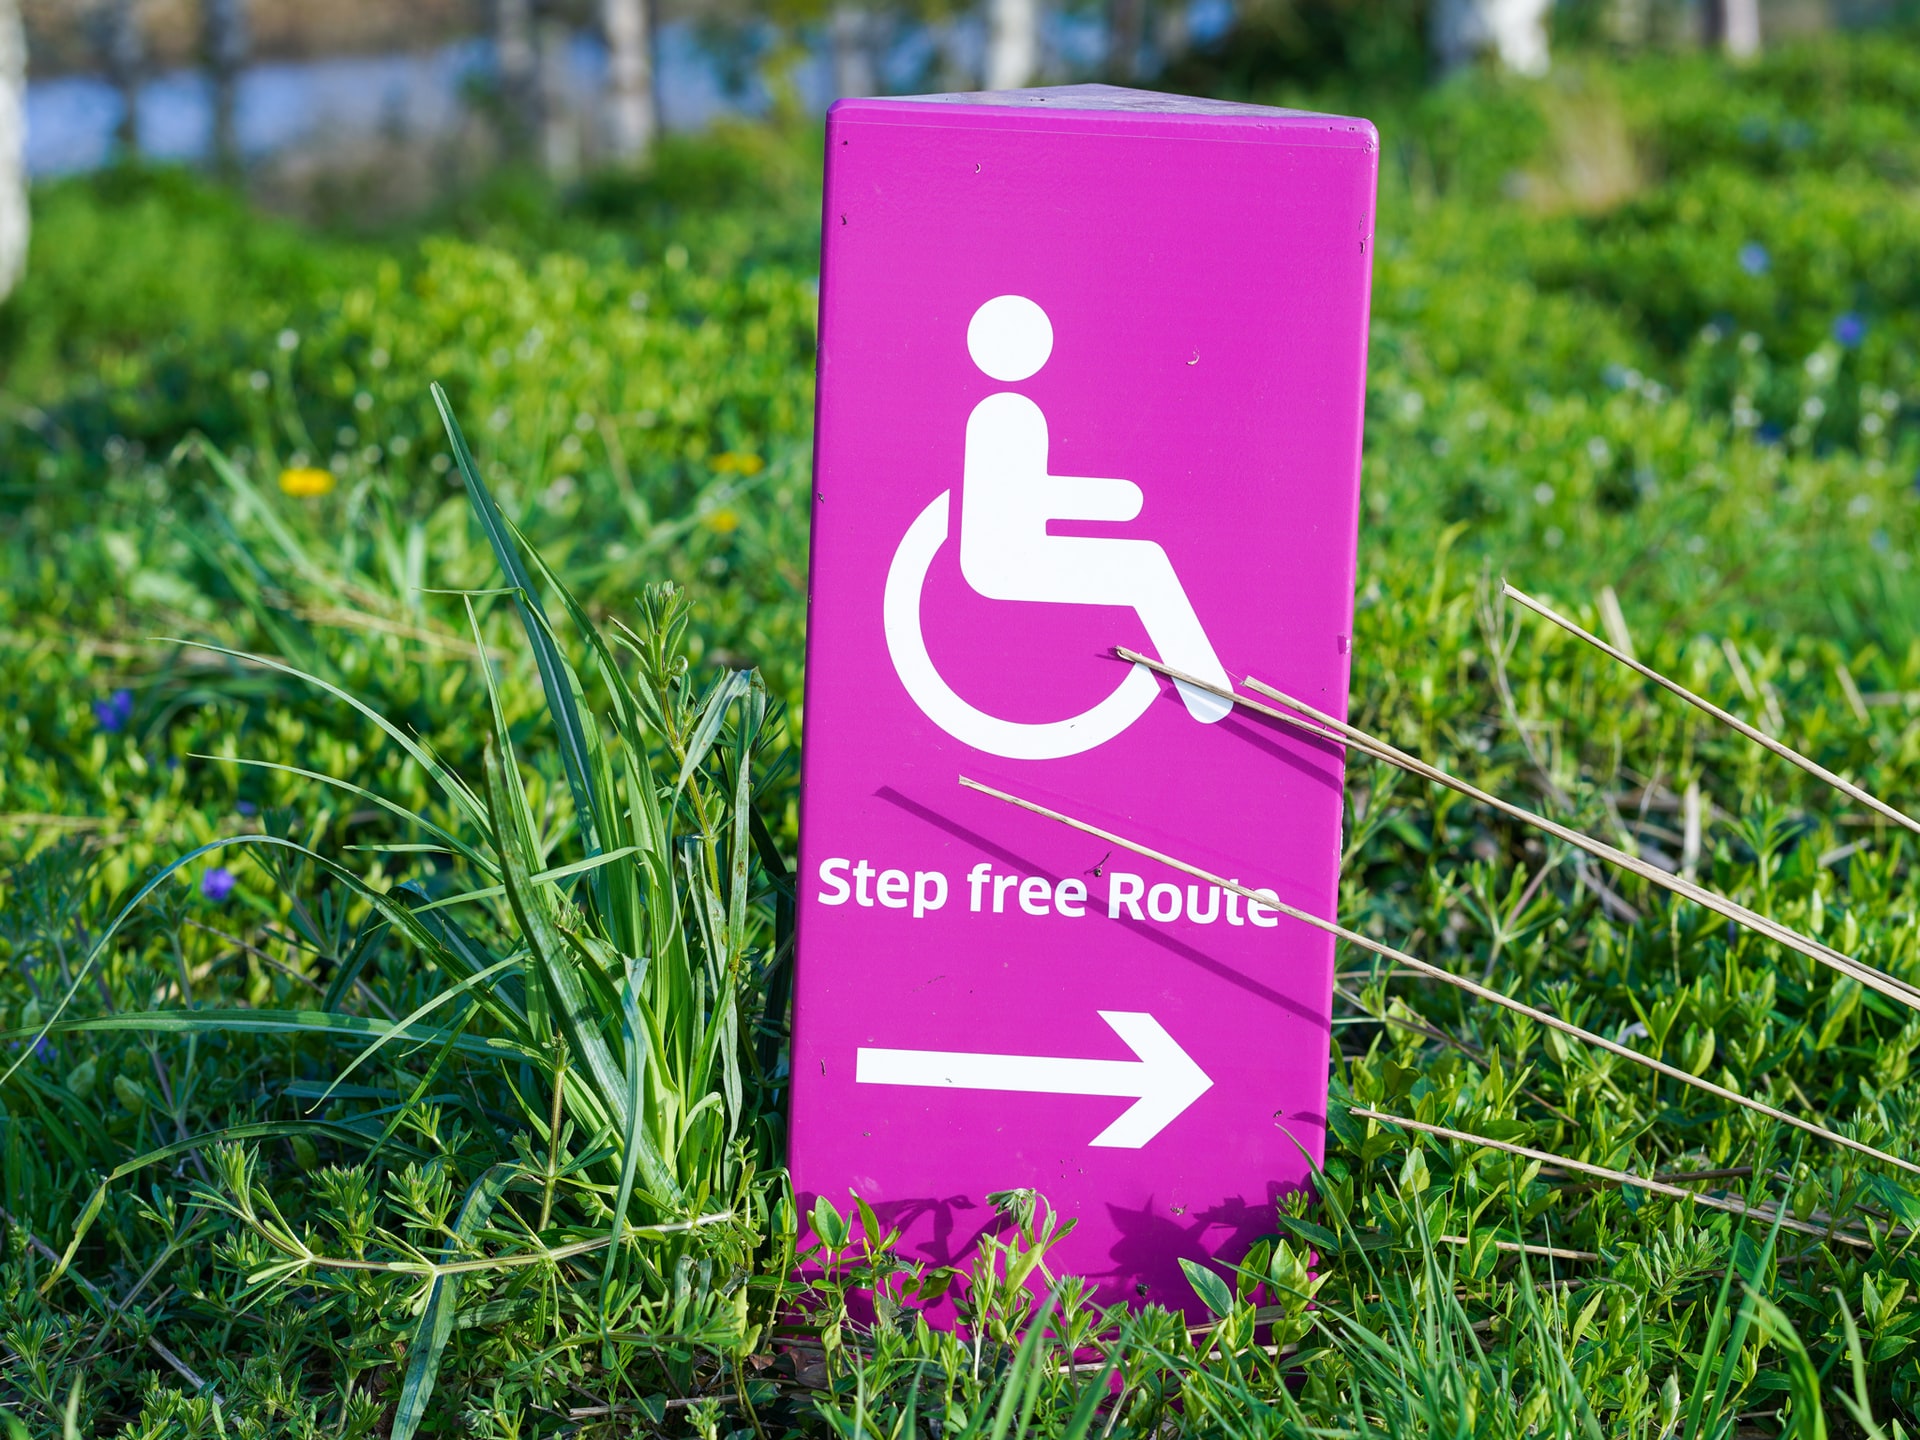 Step free route sign